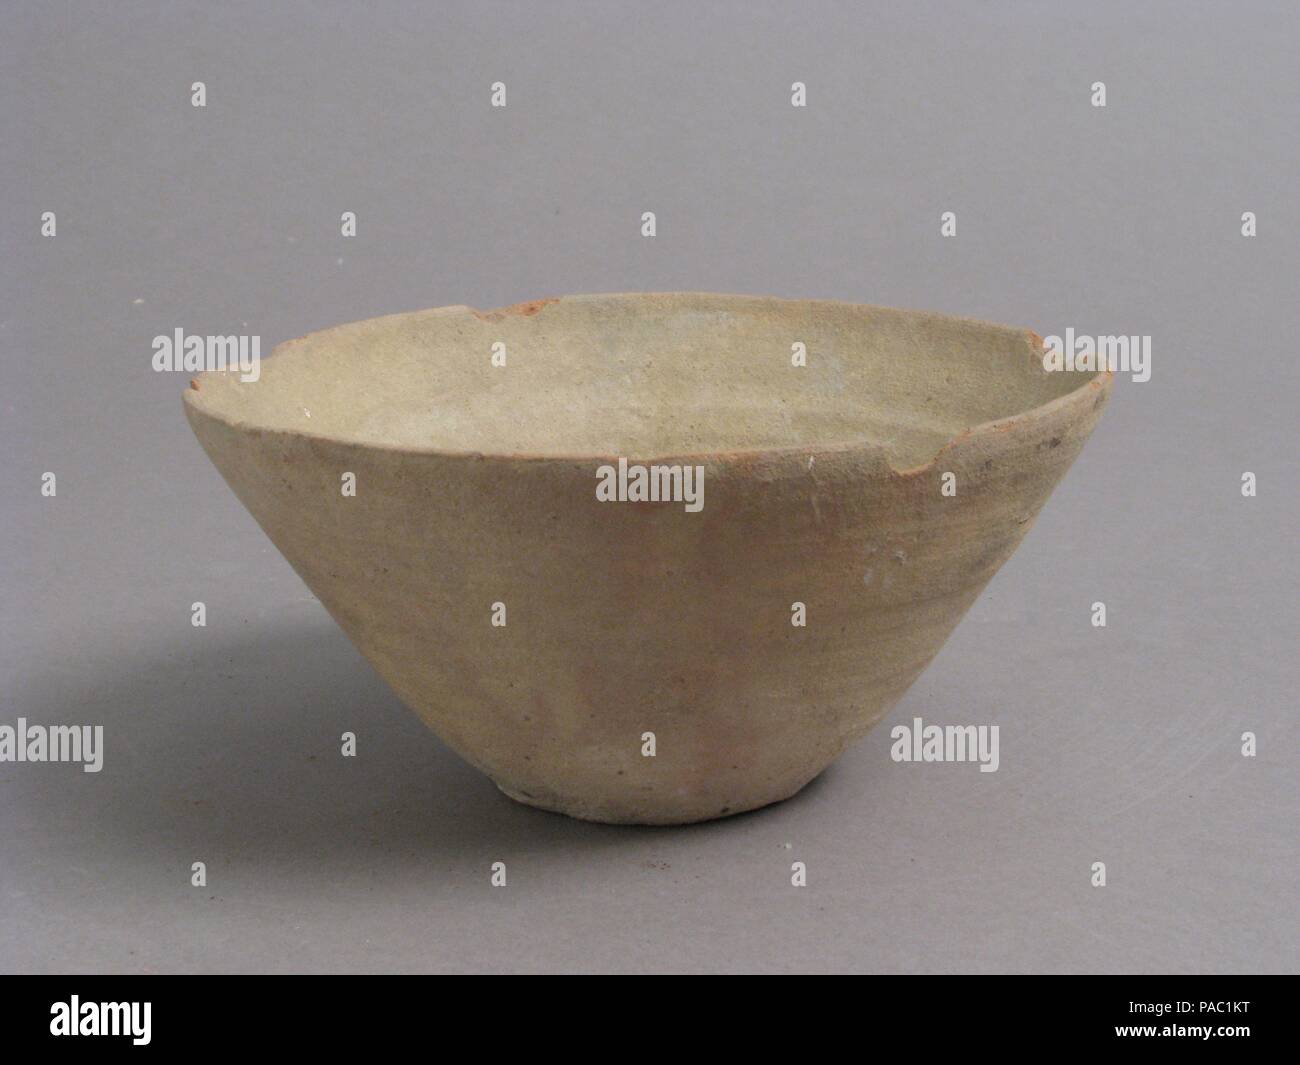 Bowl. Culture: Coptic. Dimensions: Overall: 2 1/2 x 5 3/8 in. (6.4 x 13.7 cm). Date: 4th-7th century. Museum: Metropolitan Museum of Art, New York, USA. Stock Photo